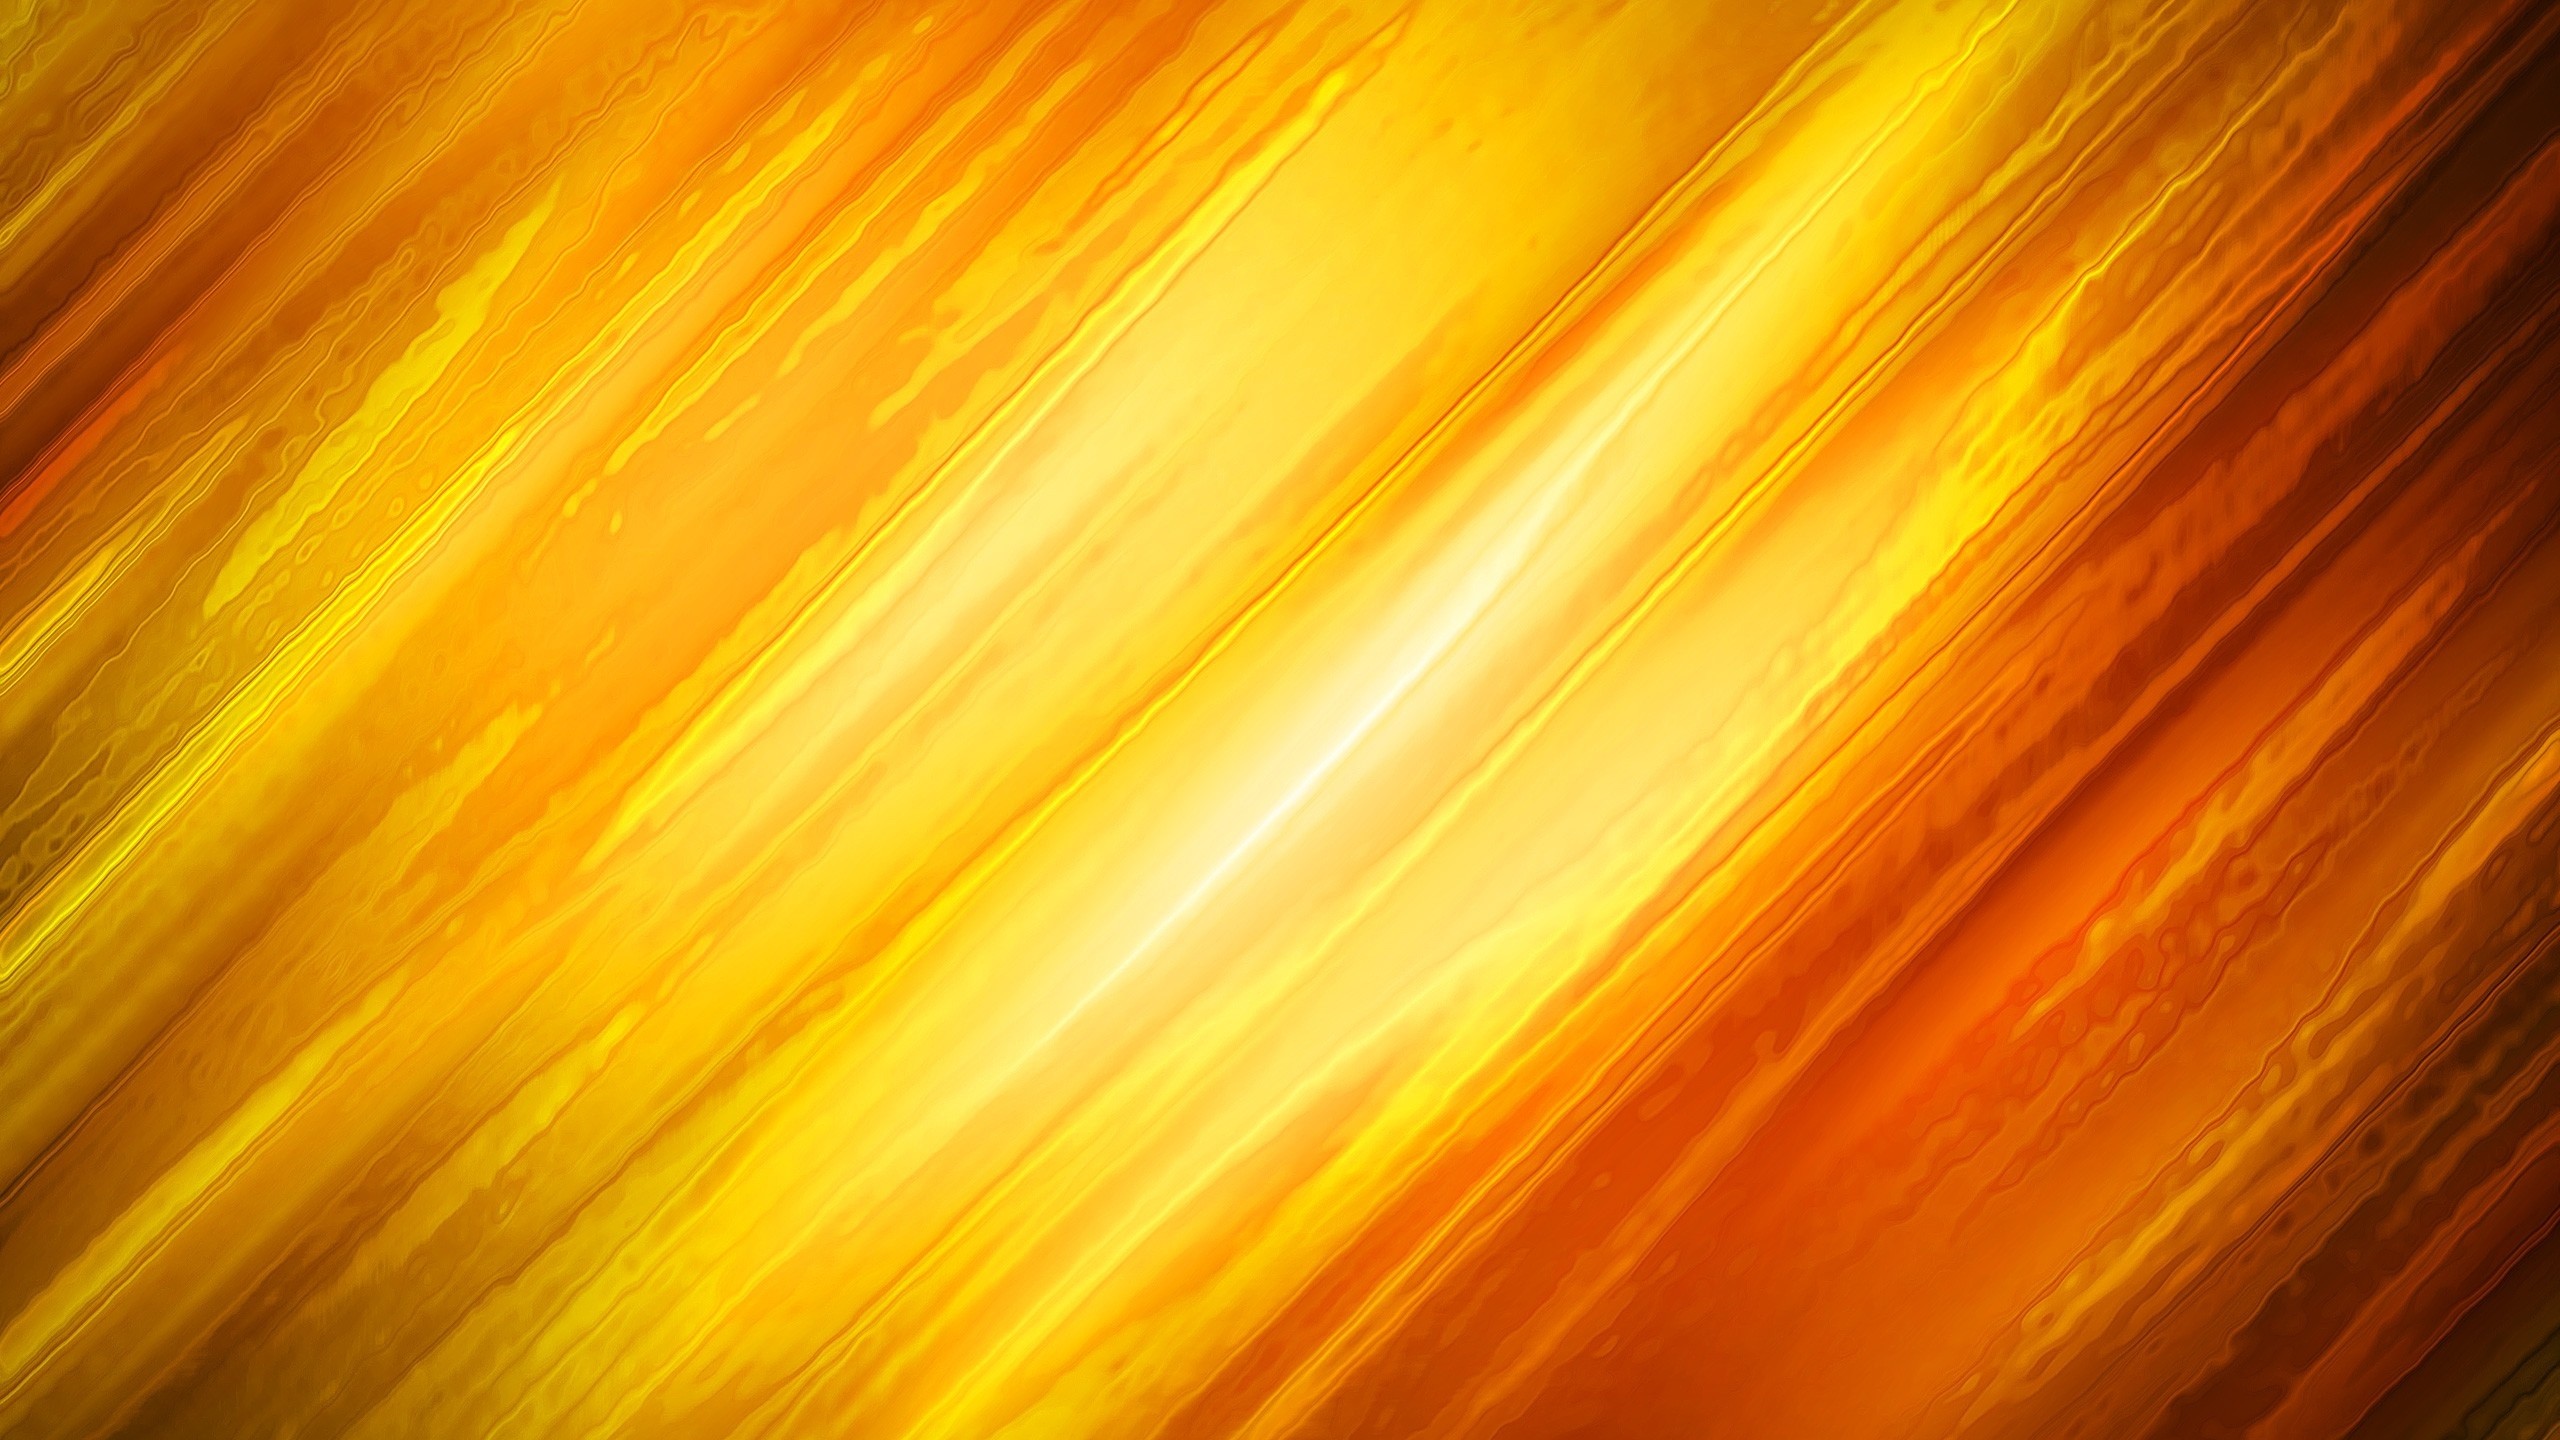 2560x1440  Abstract Yellow and Orange Background desktop PC and Mac wallpaper